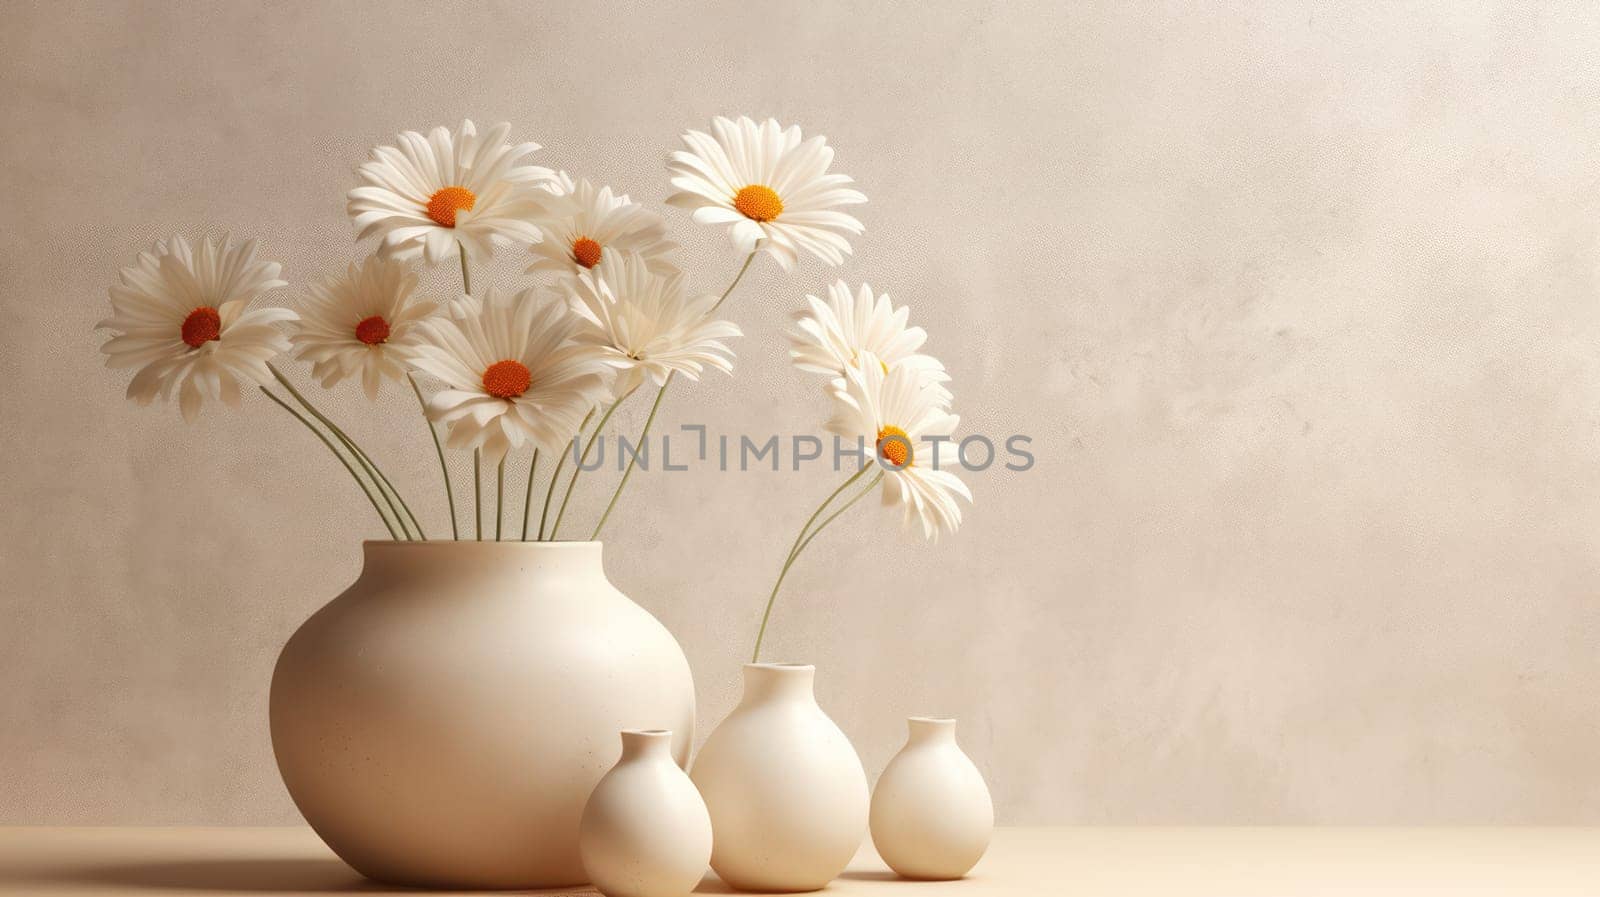 White Floral Beauty on Wooden Table: A Rustic Bouquet of Fresh Spring Blossoms in a Vintage Vase